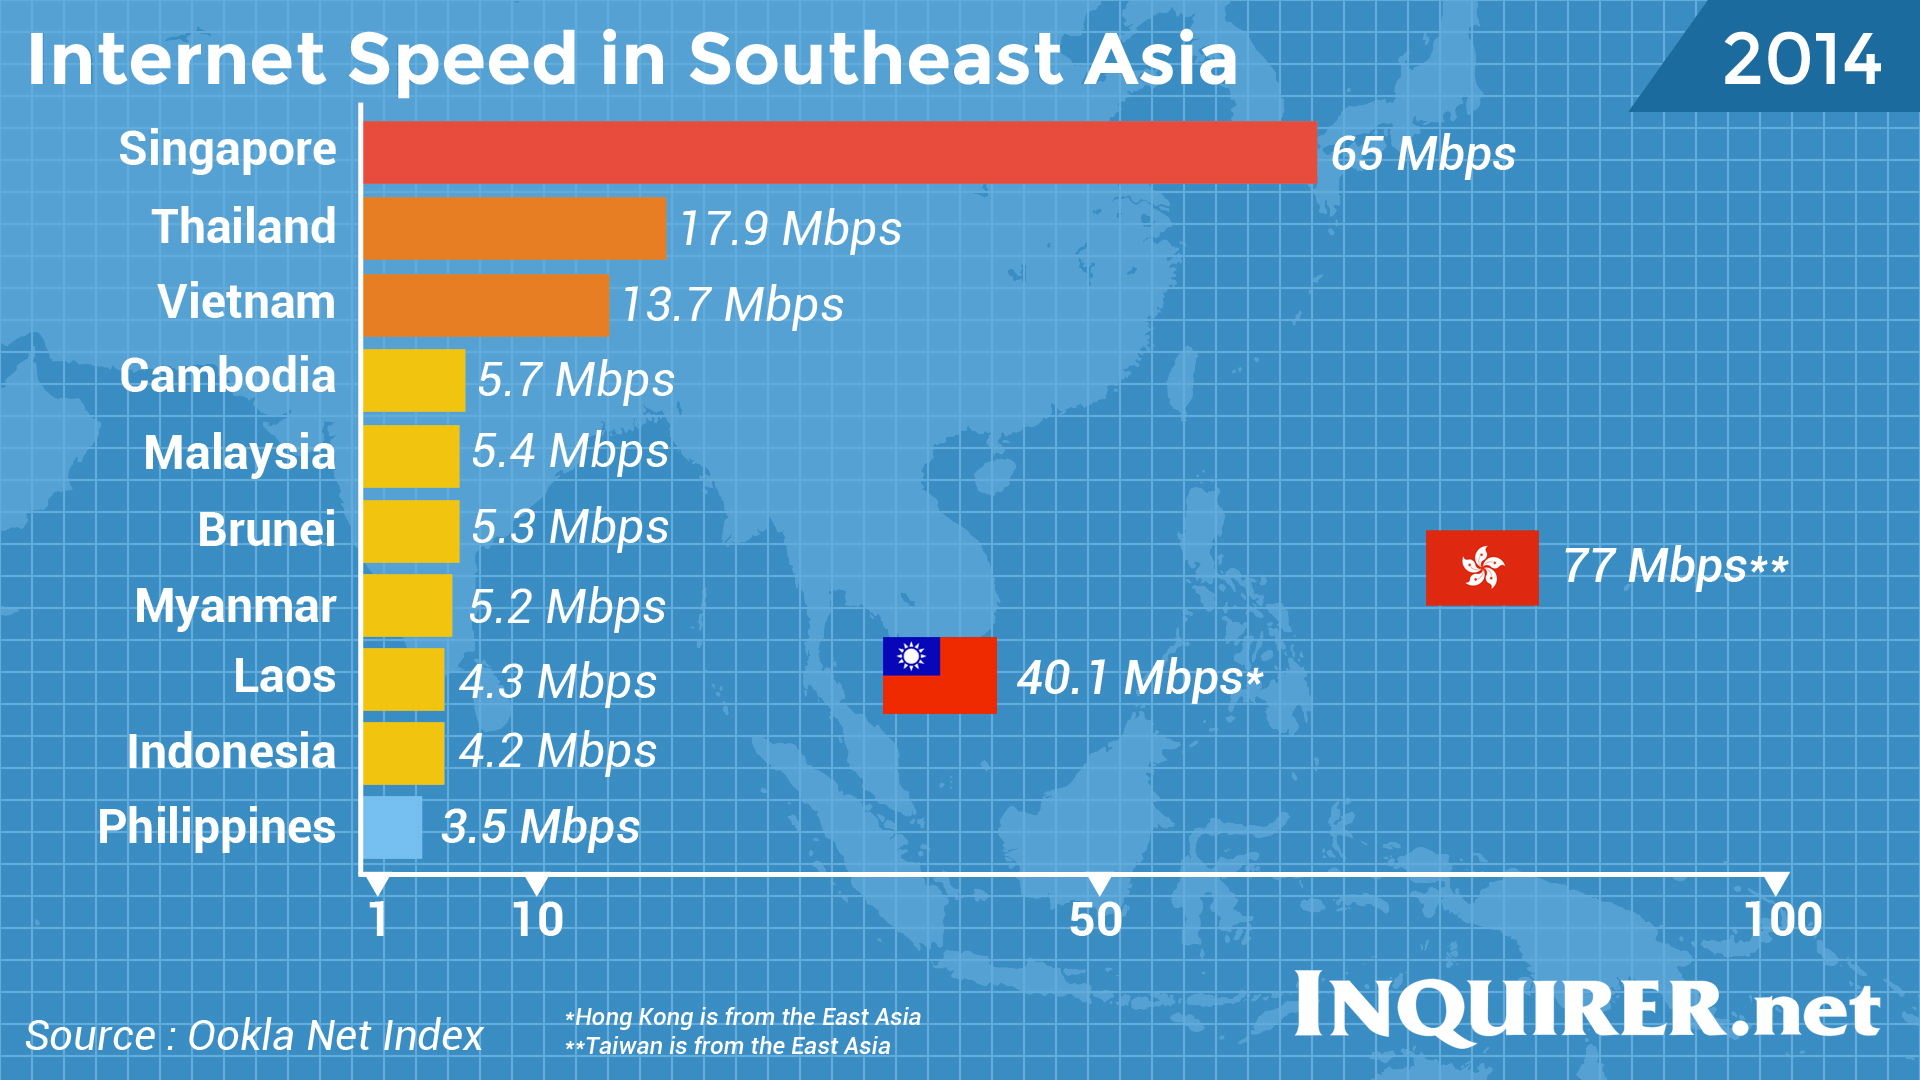 Internet-speed-comparison-in-South-East-Asia.jpg